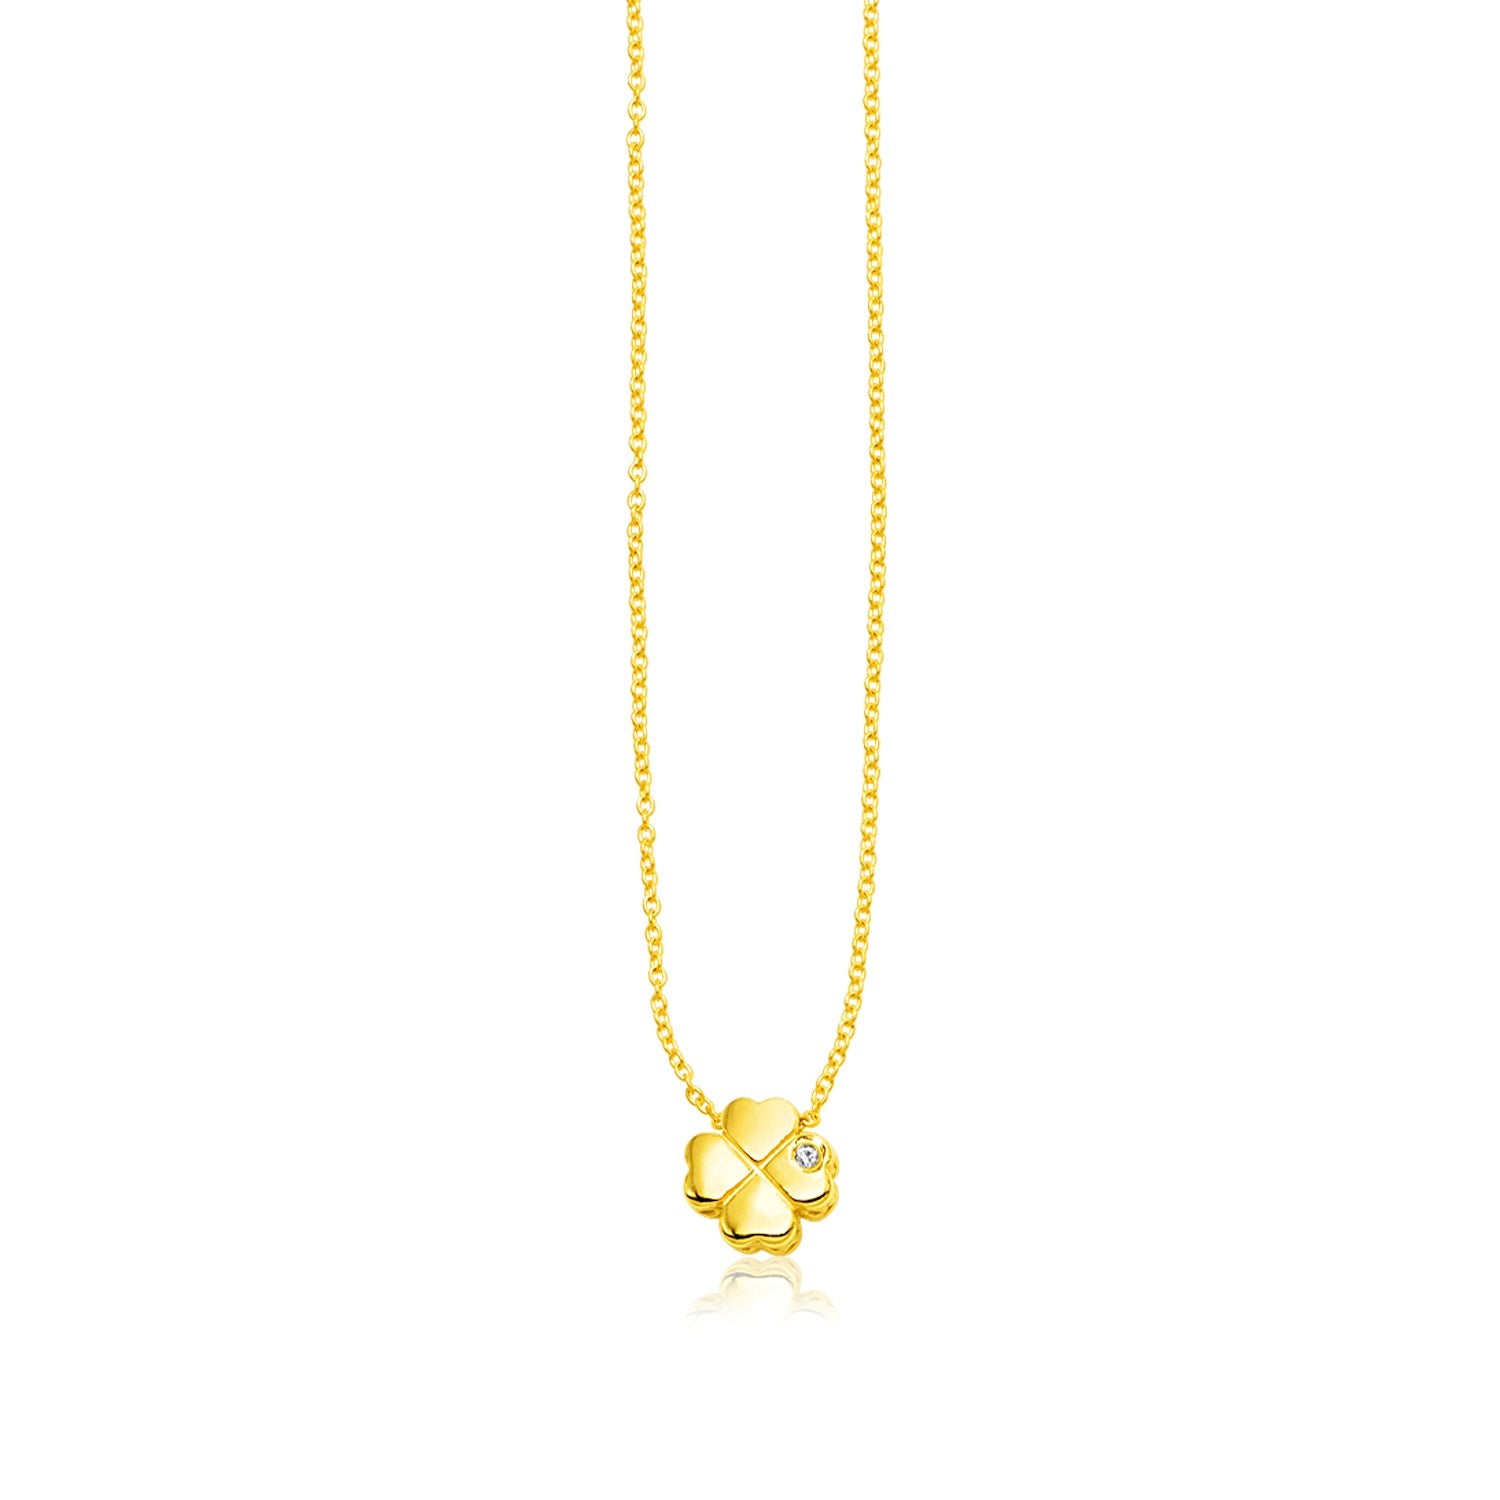 14KT Yellow Gold Four Leaf Clover Necklace 0.07 CT. T.W. - Spence Diamonds